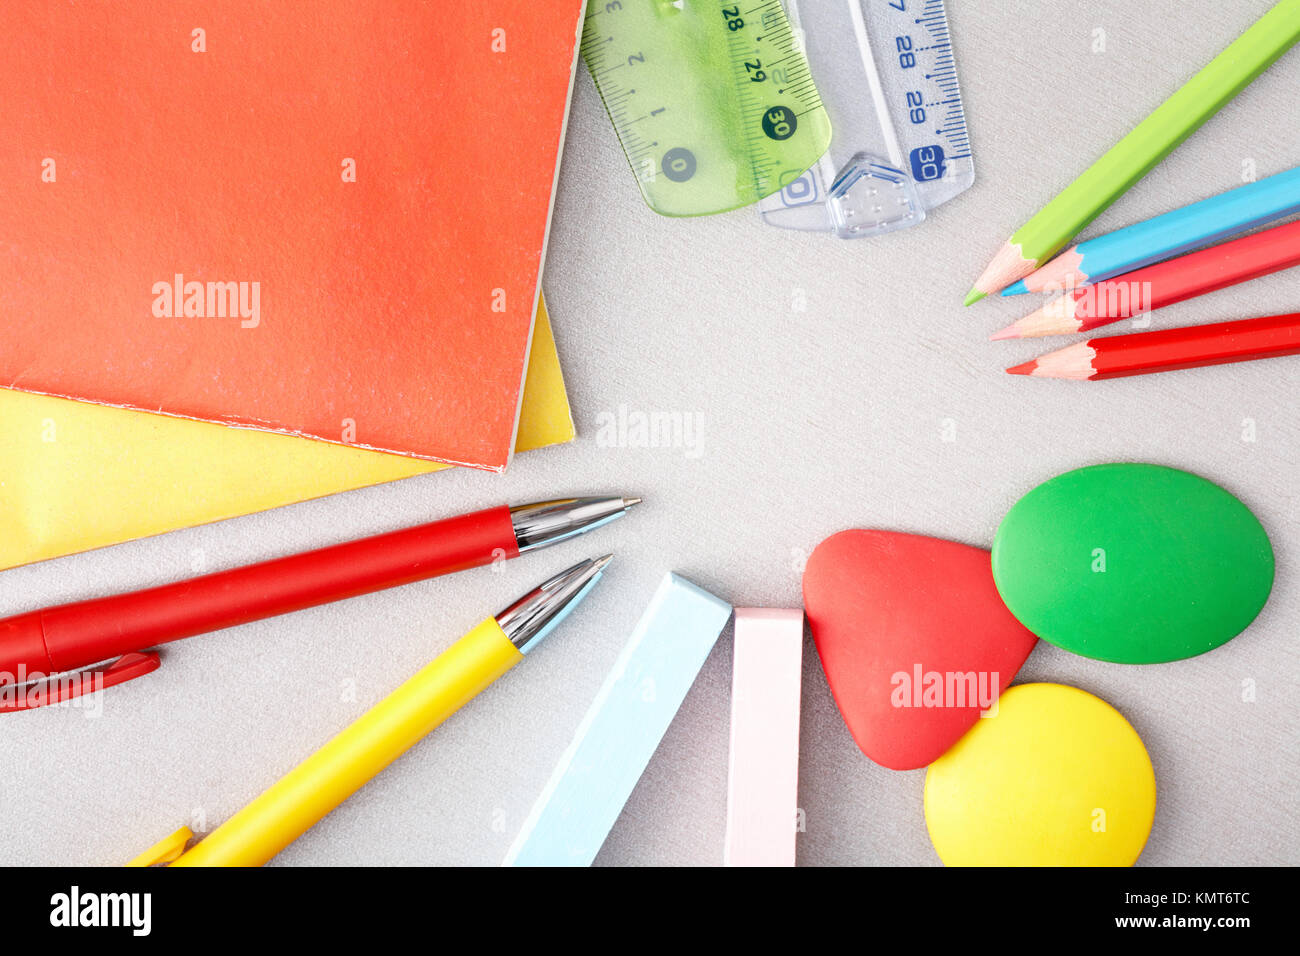 Close-up of various objects needed in school education process Stock Photo